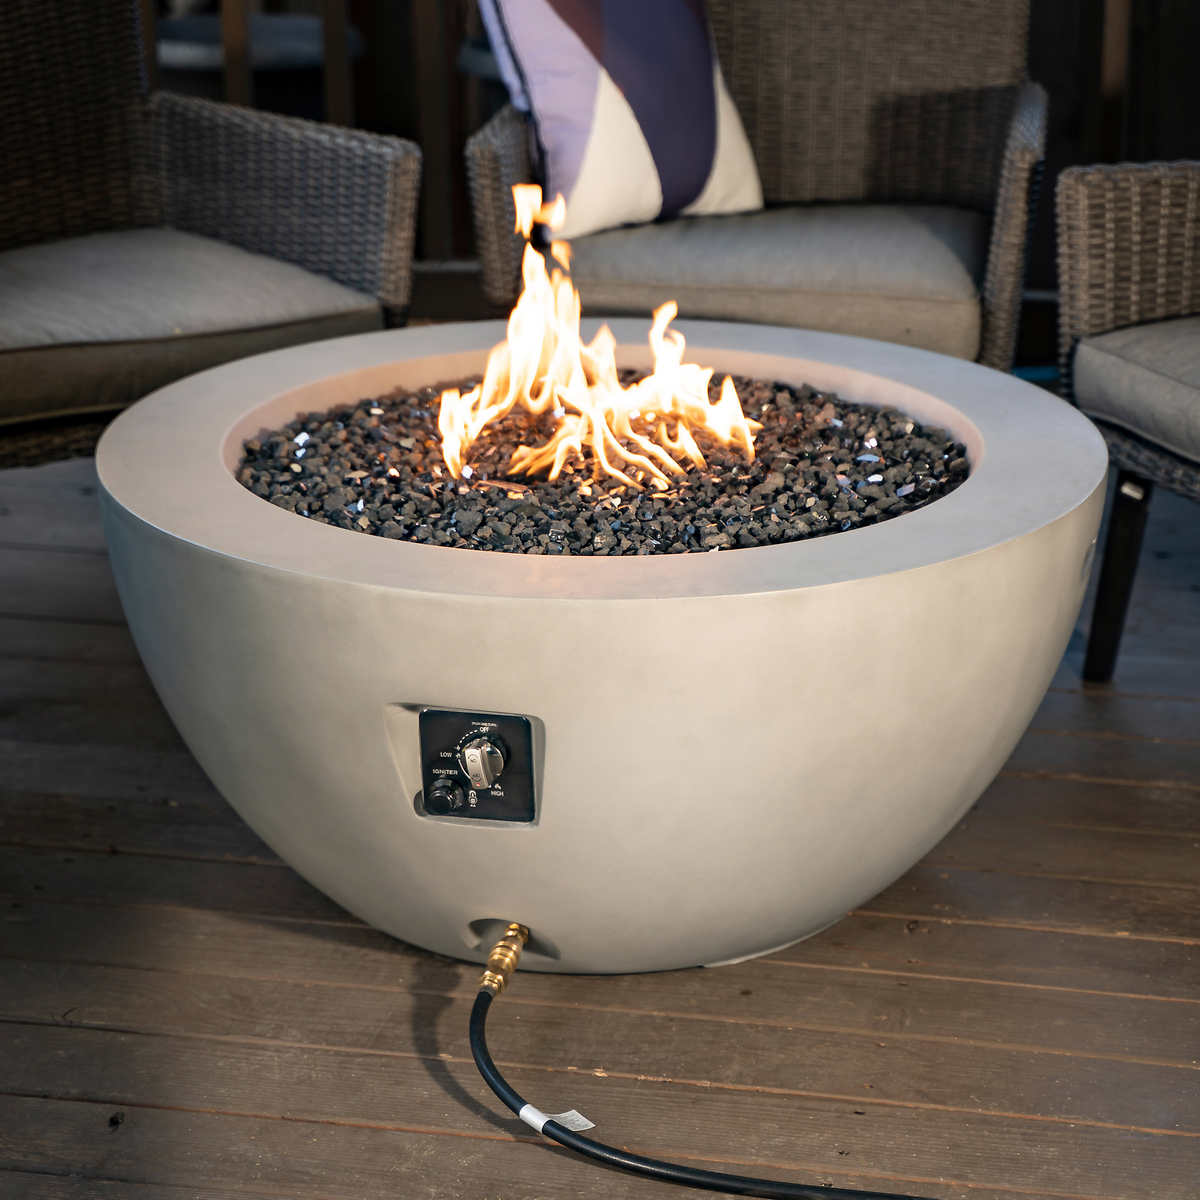 Faux Concrete Gas Fire Pit Costco, Can I Use A Gas Fire Pit On My Deck